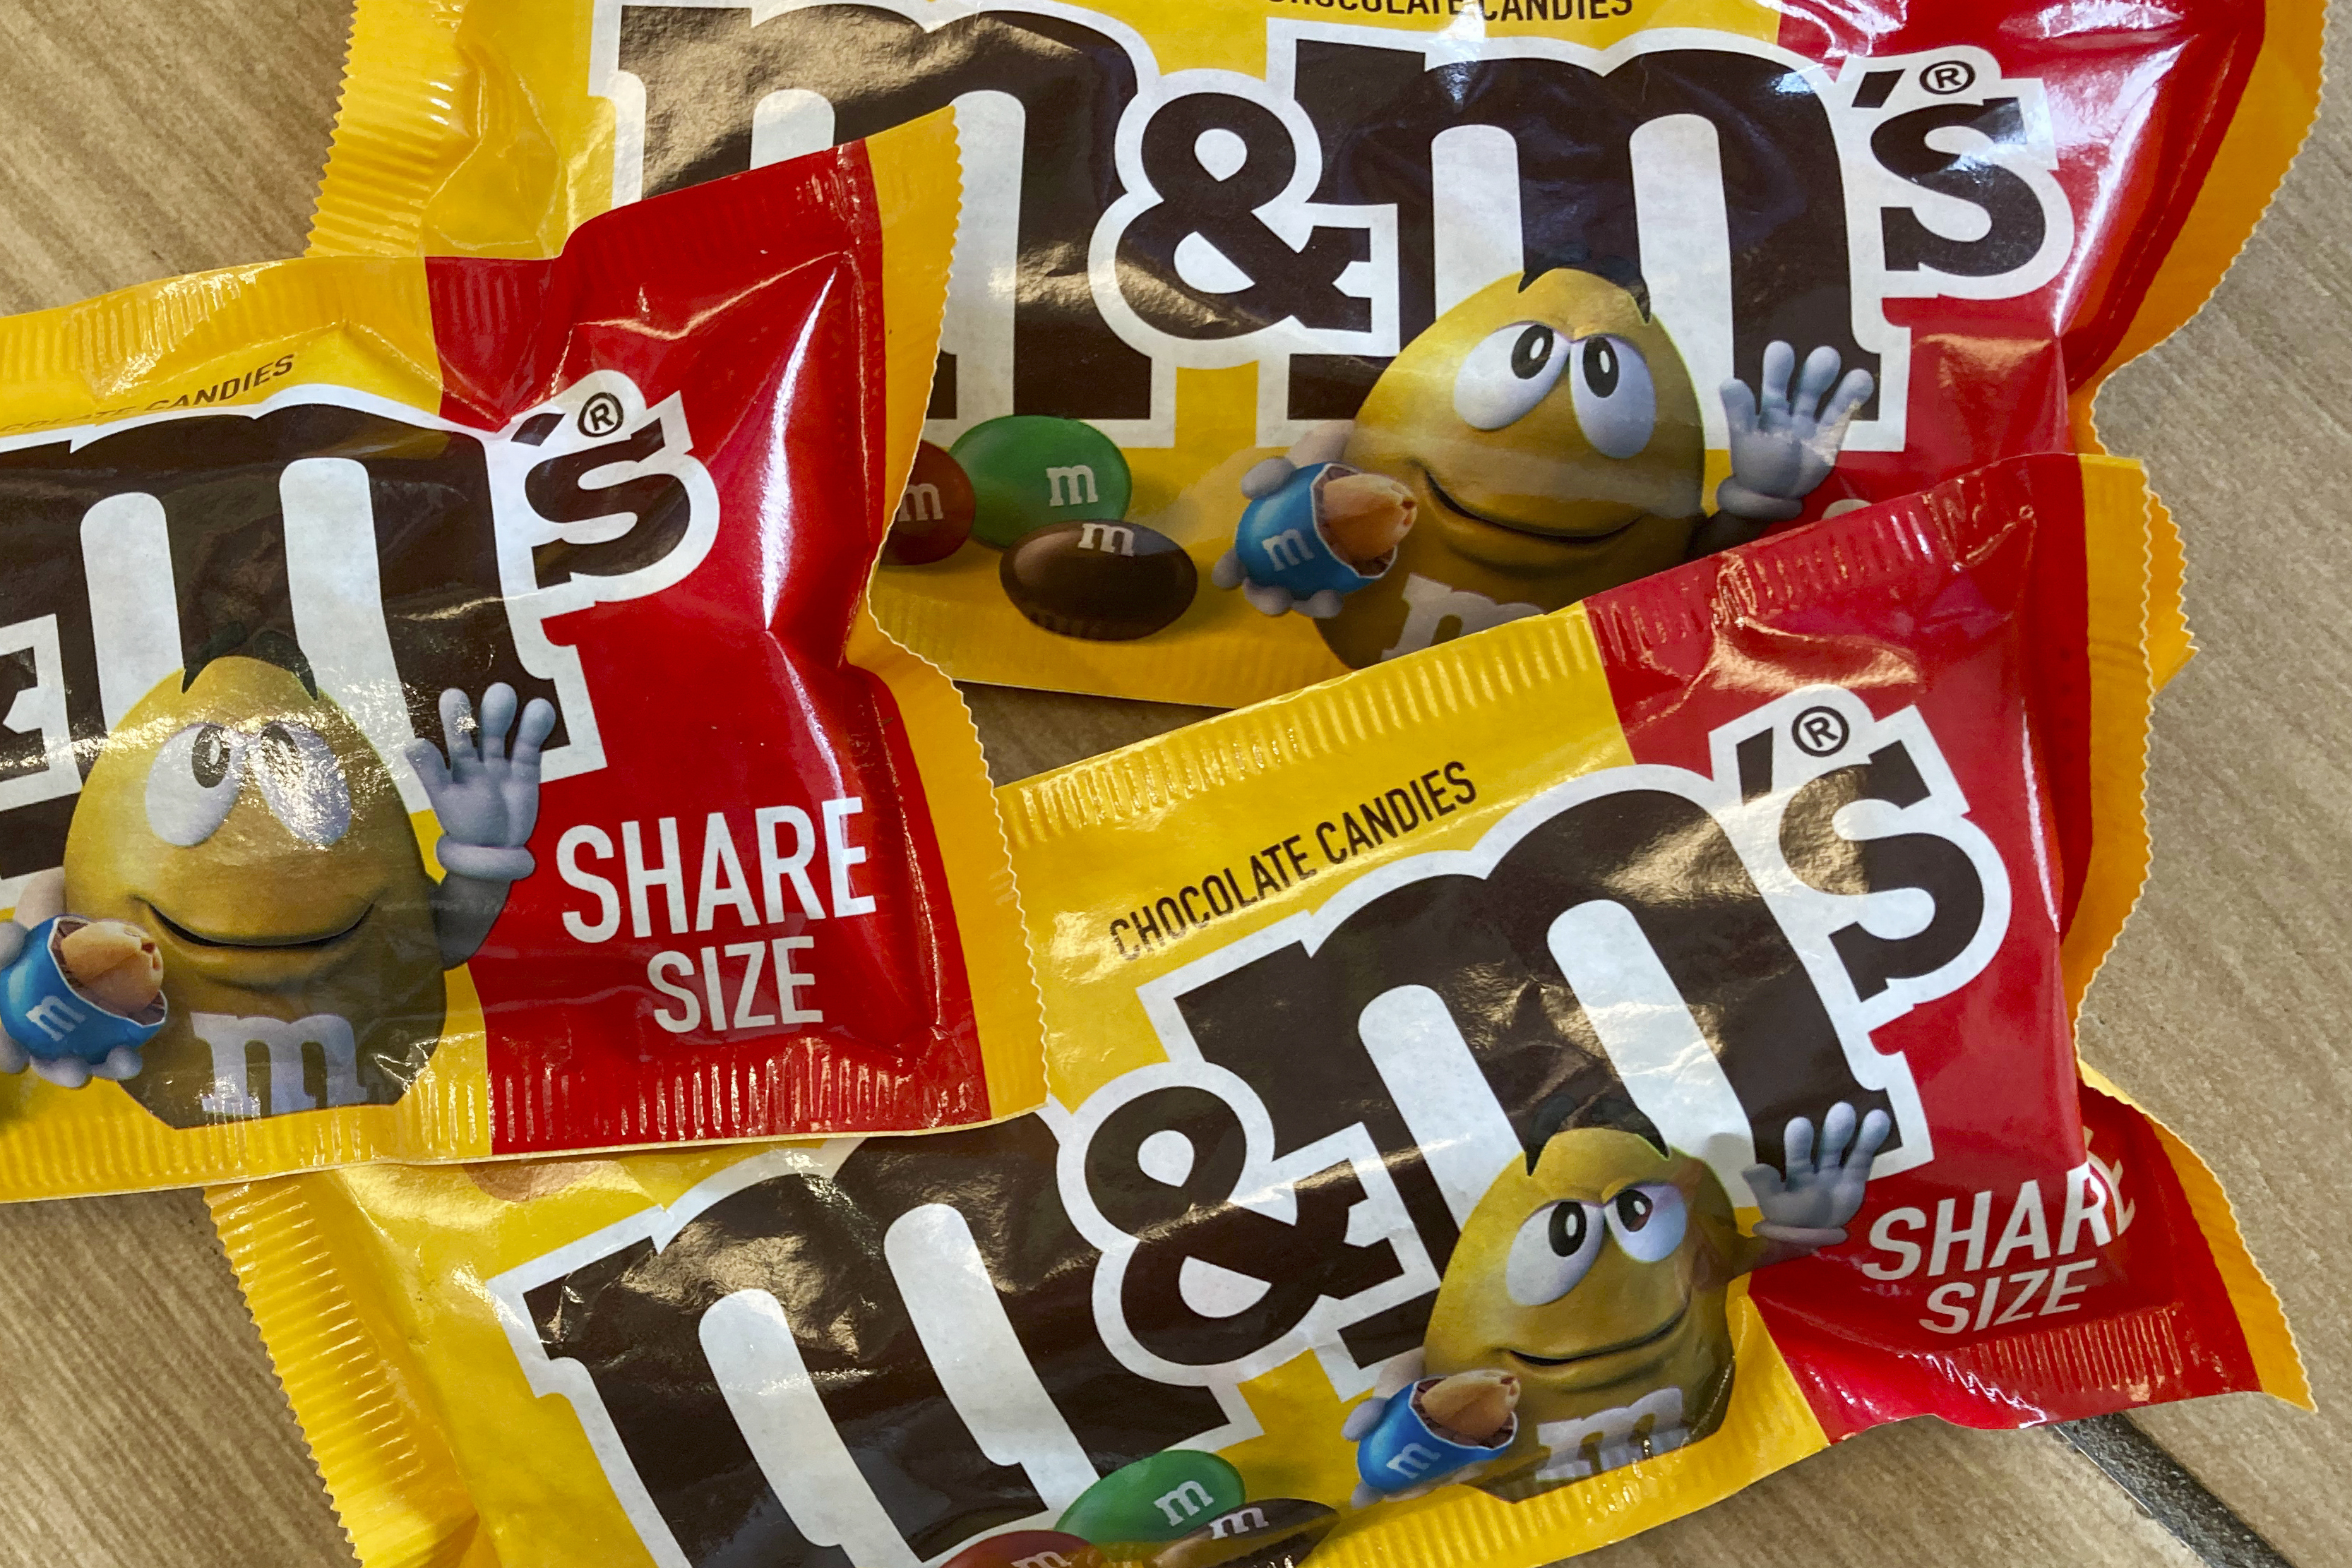 M&M's candy characters getting an updated look to be more 'inclusive' 